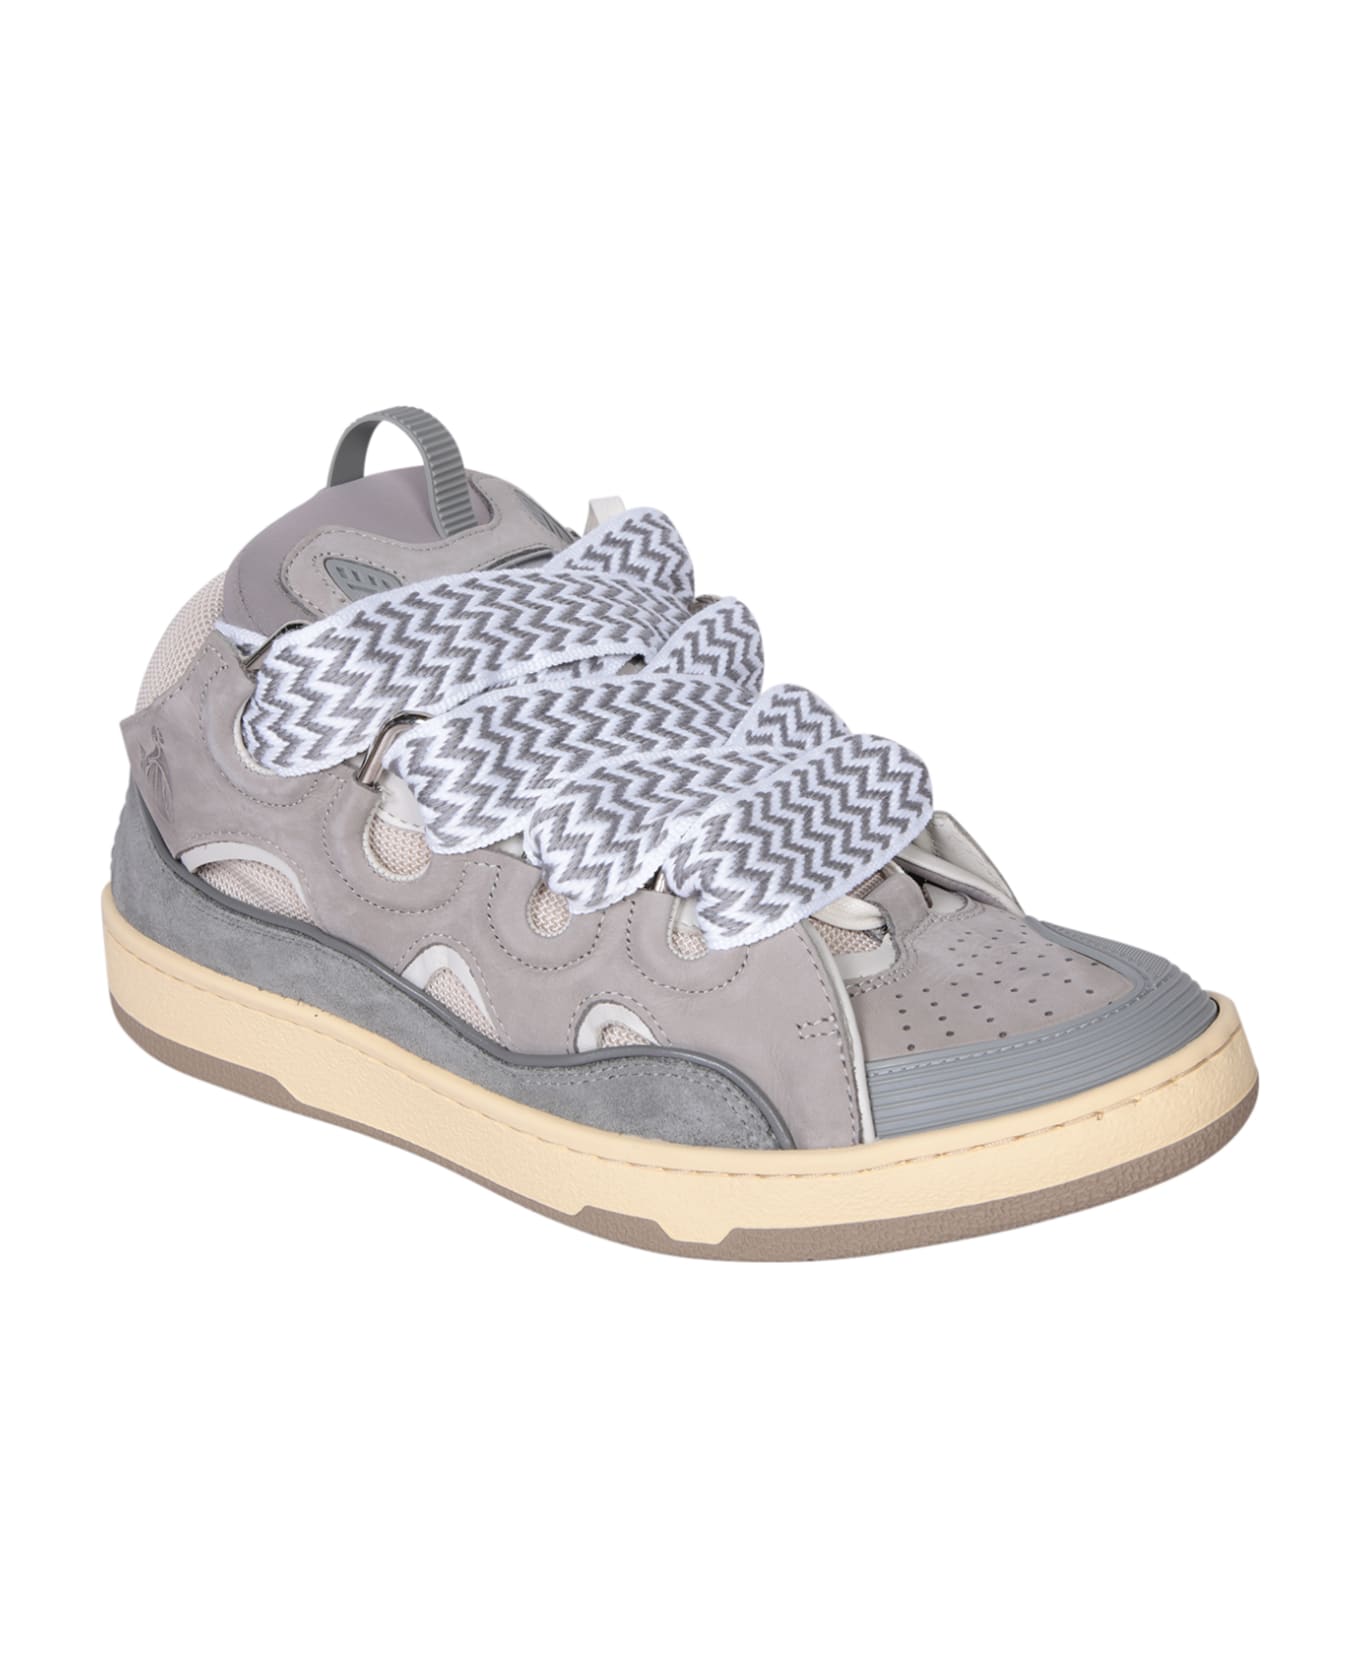 Lanvin Thick Lace Sneakers - Grey 2 スニーカー